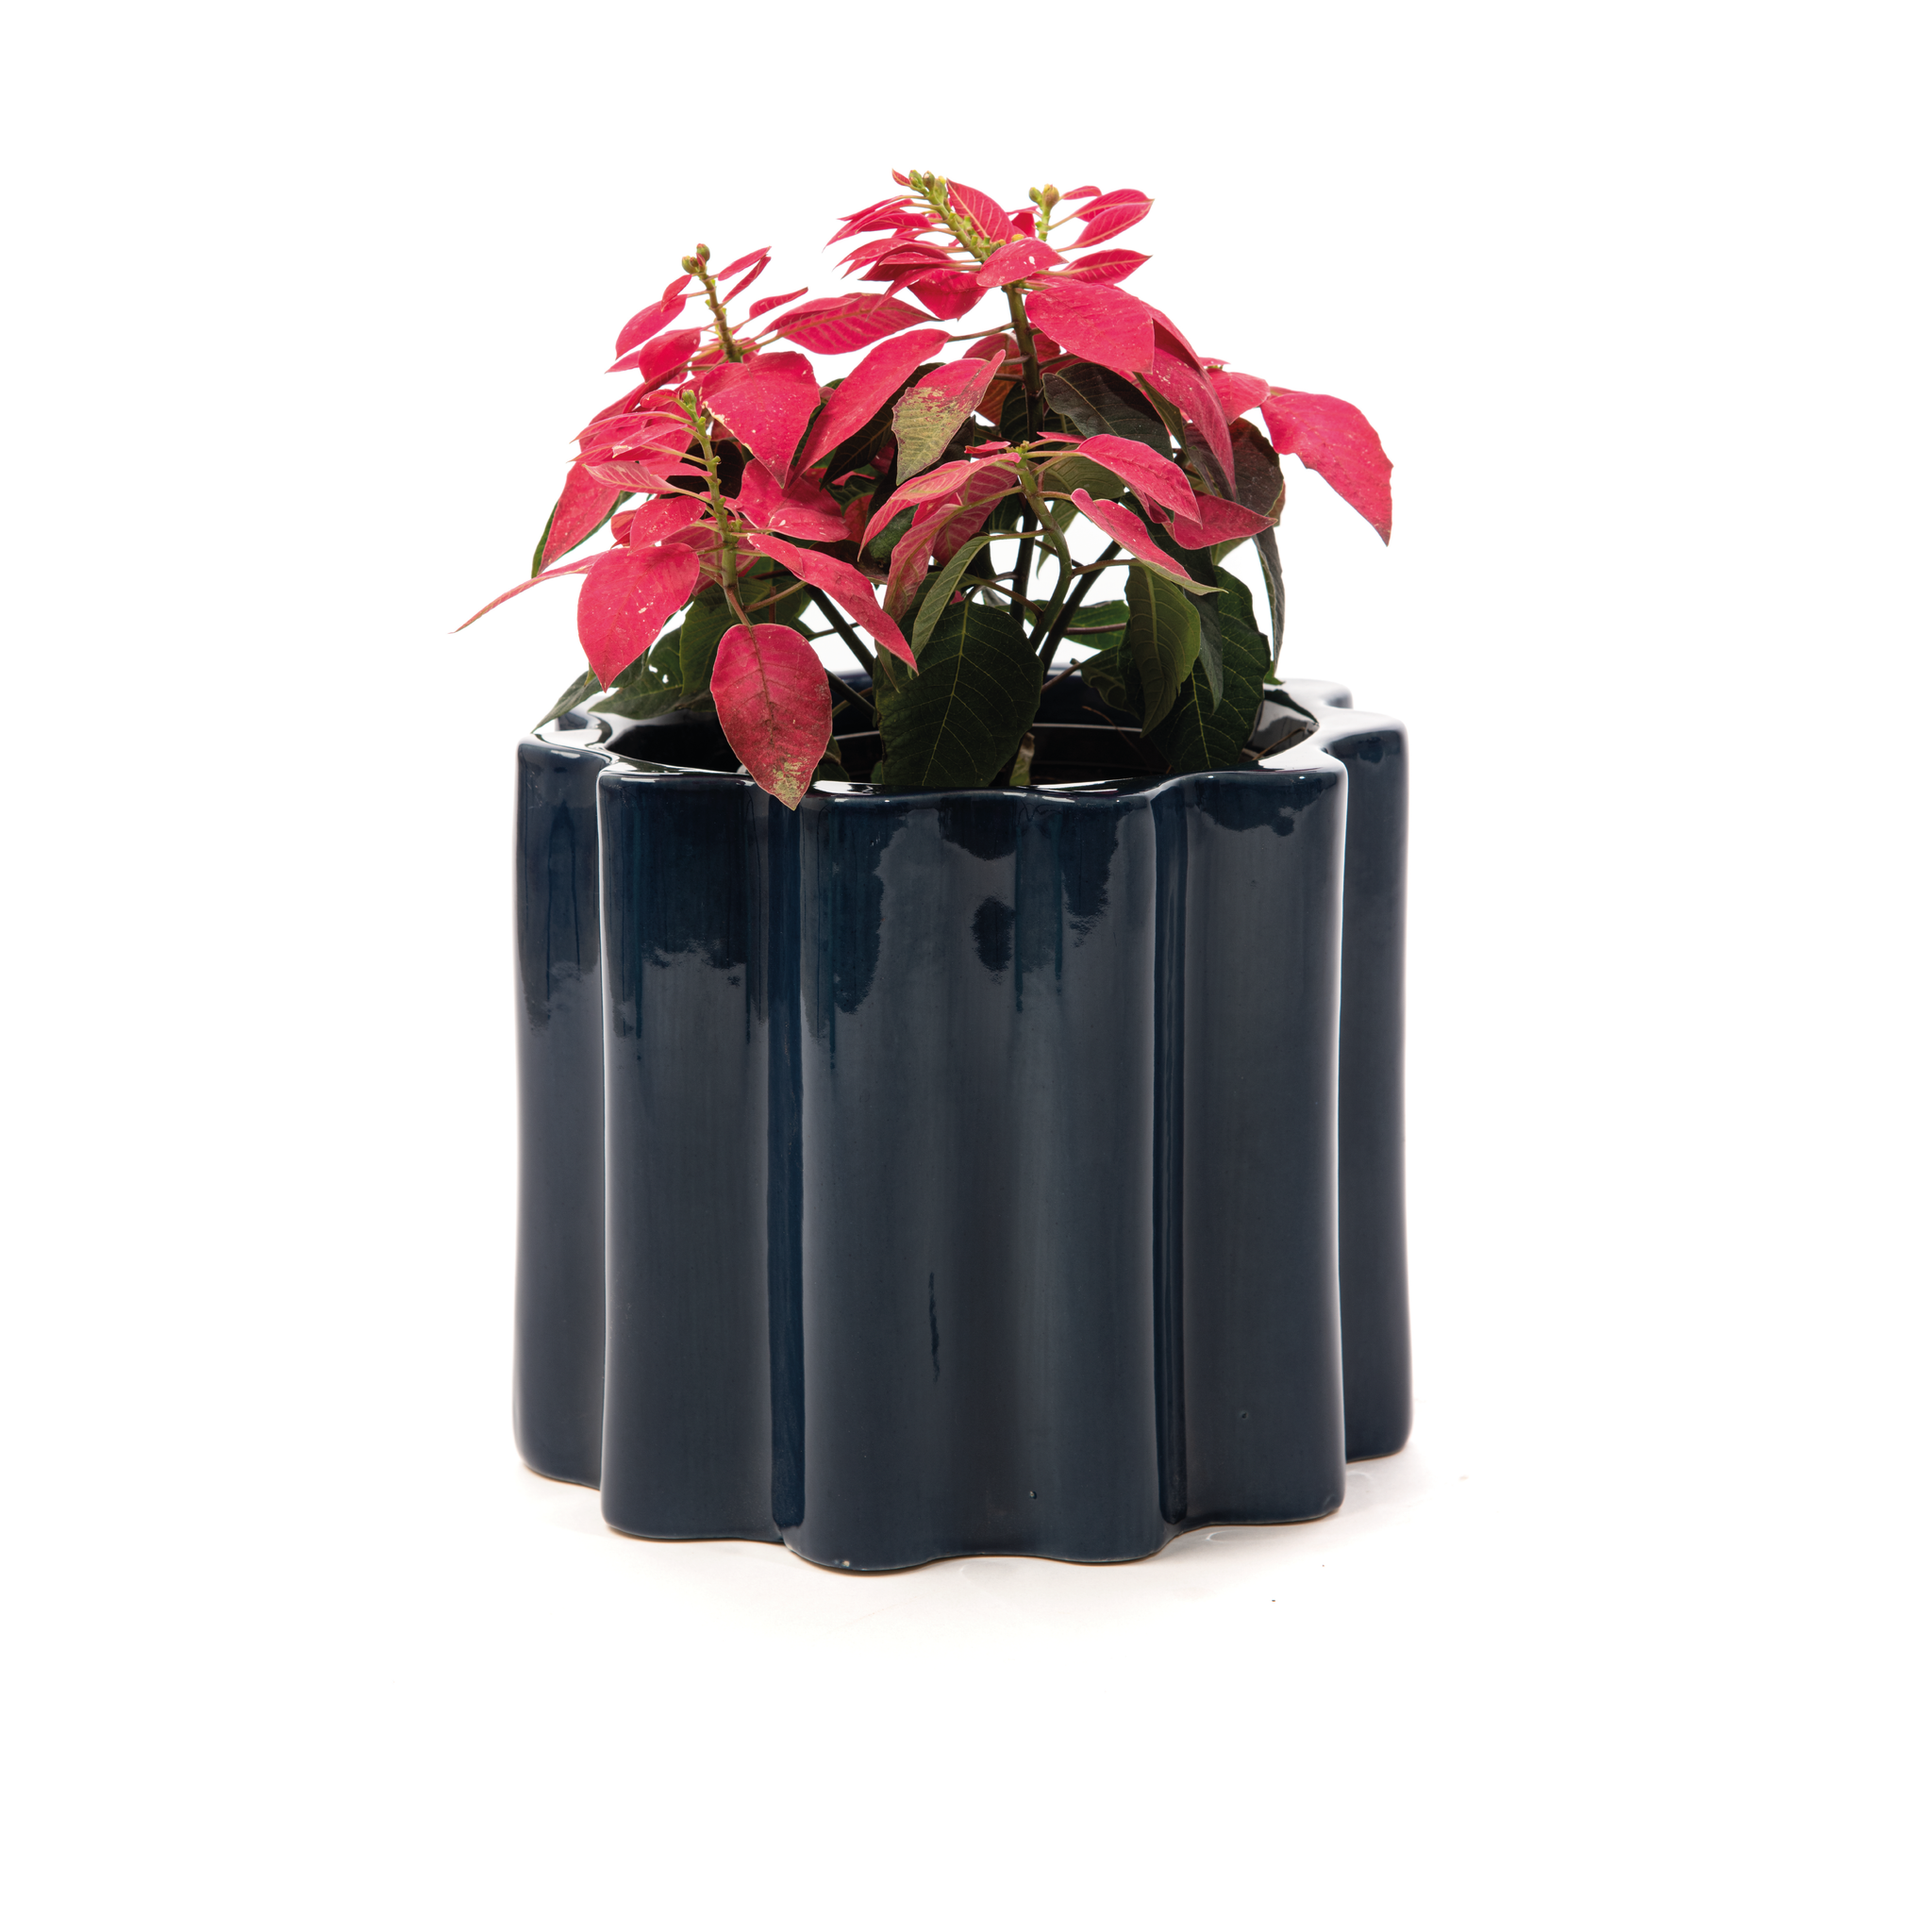 Small Size Balmy Waves Ceramic Planter in Midnight Blue Color with Poinsettia Plant.